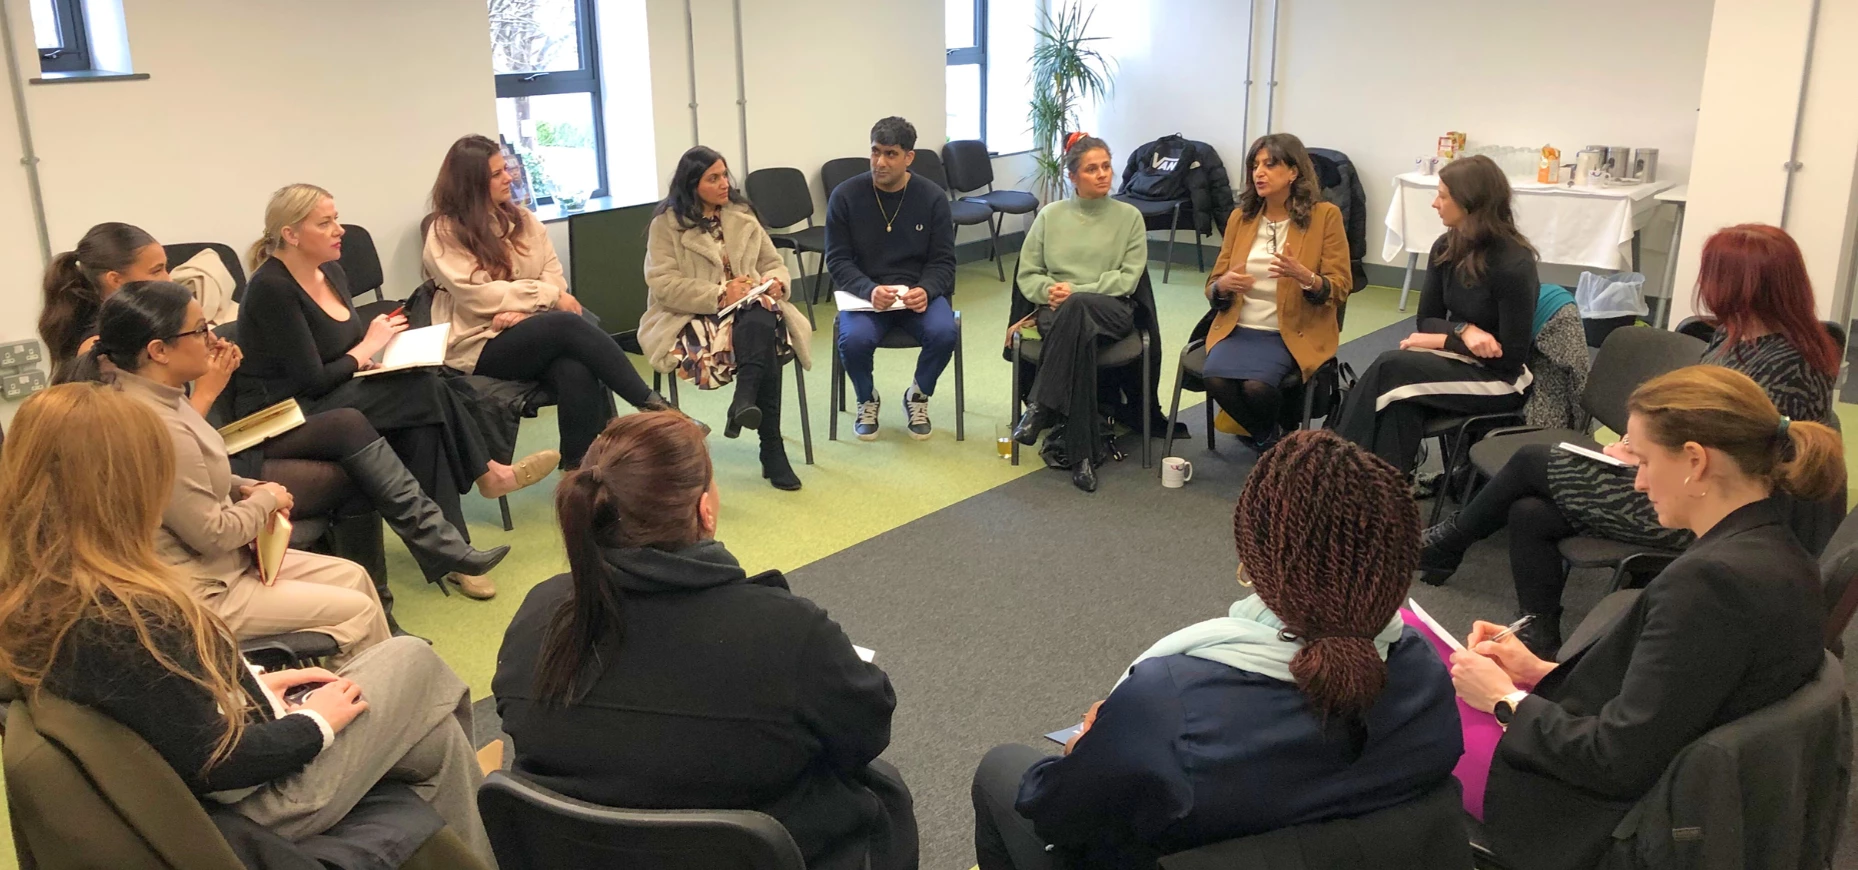 The inaugural West Yorkshire Ethnic Minority Women in Tech roundtable